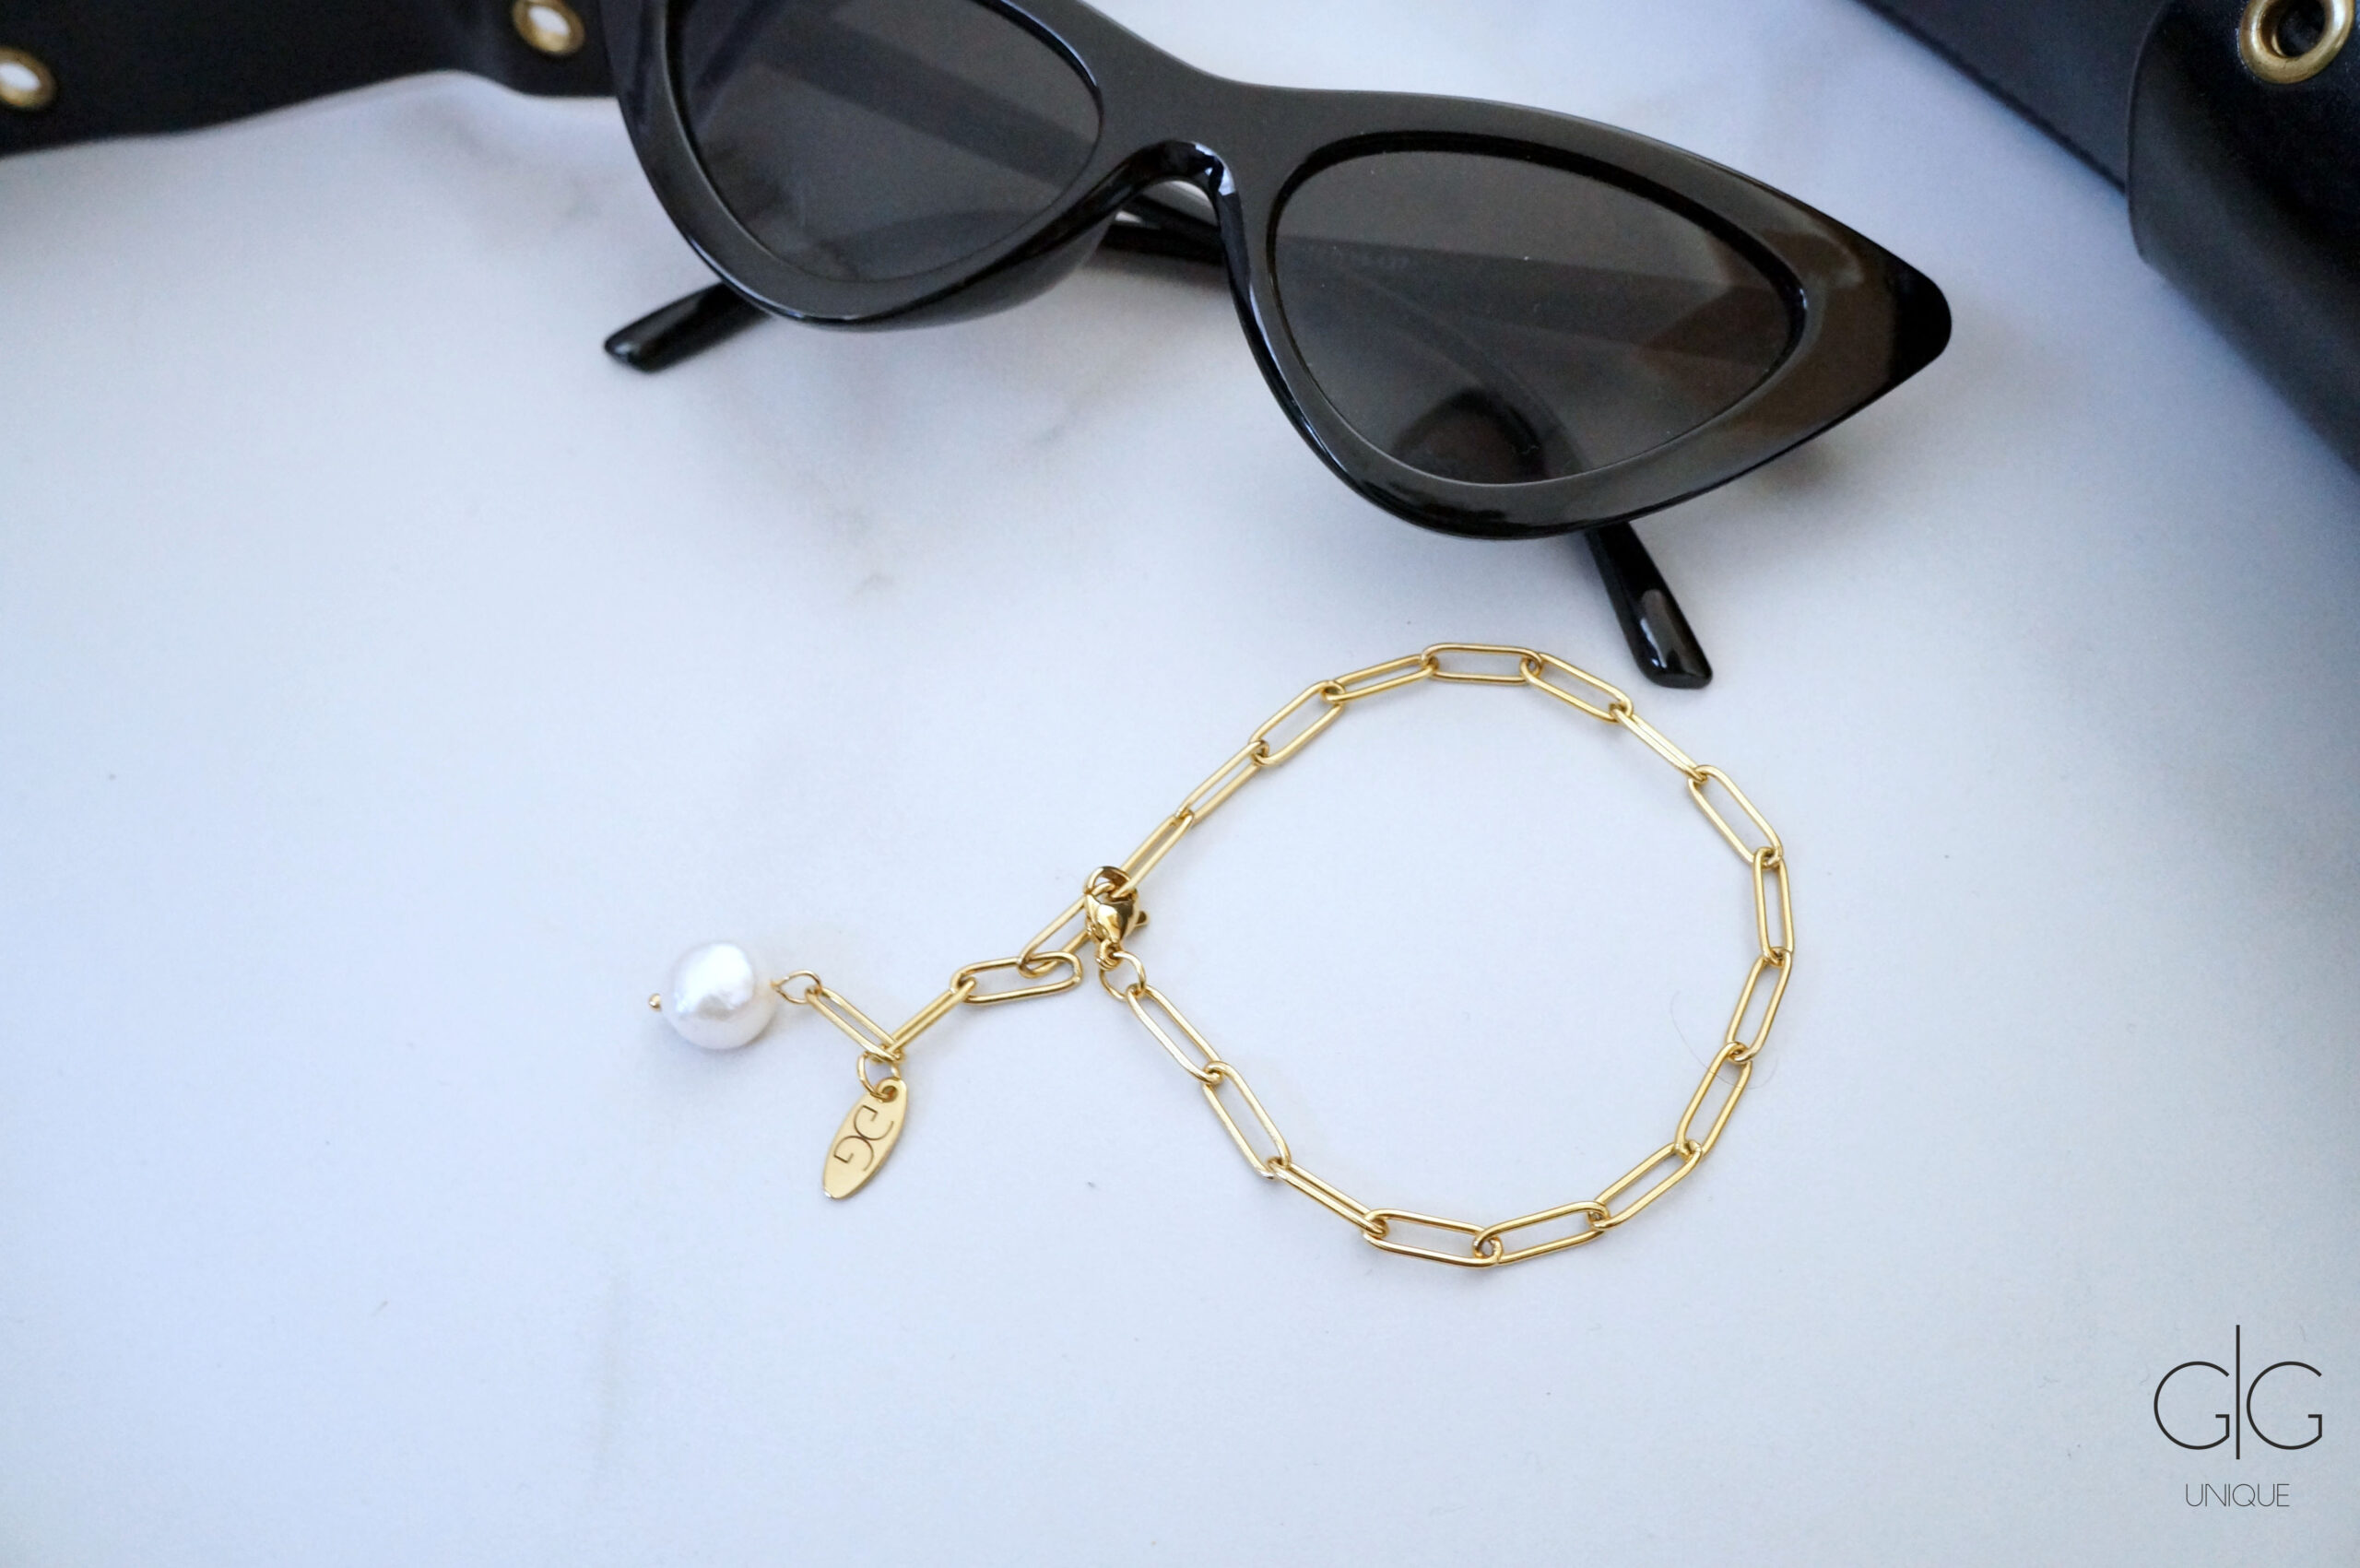 Gold-filled chain bracelet with a freshwater pearl - GG UNIQUE